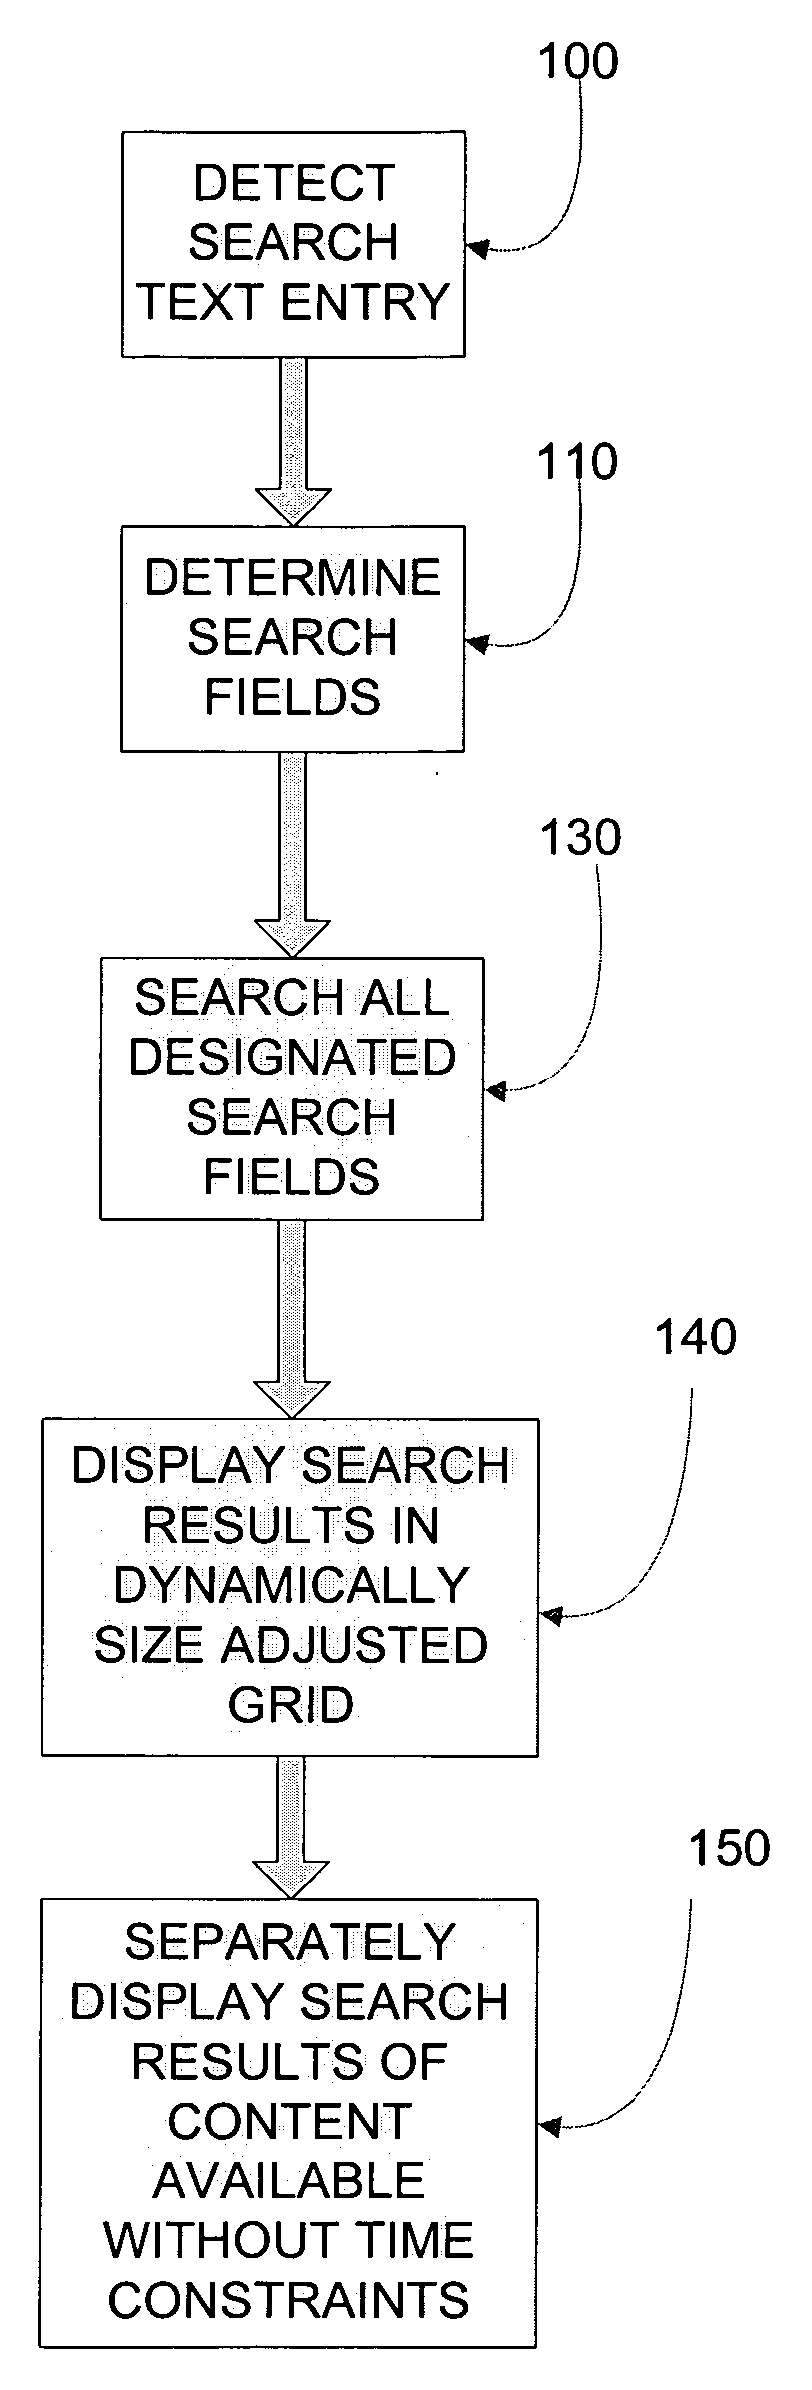 TV content search system and method with multi-field search and display